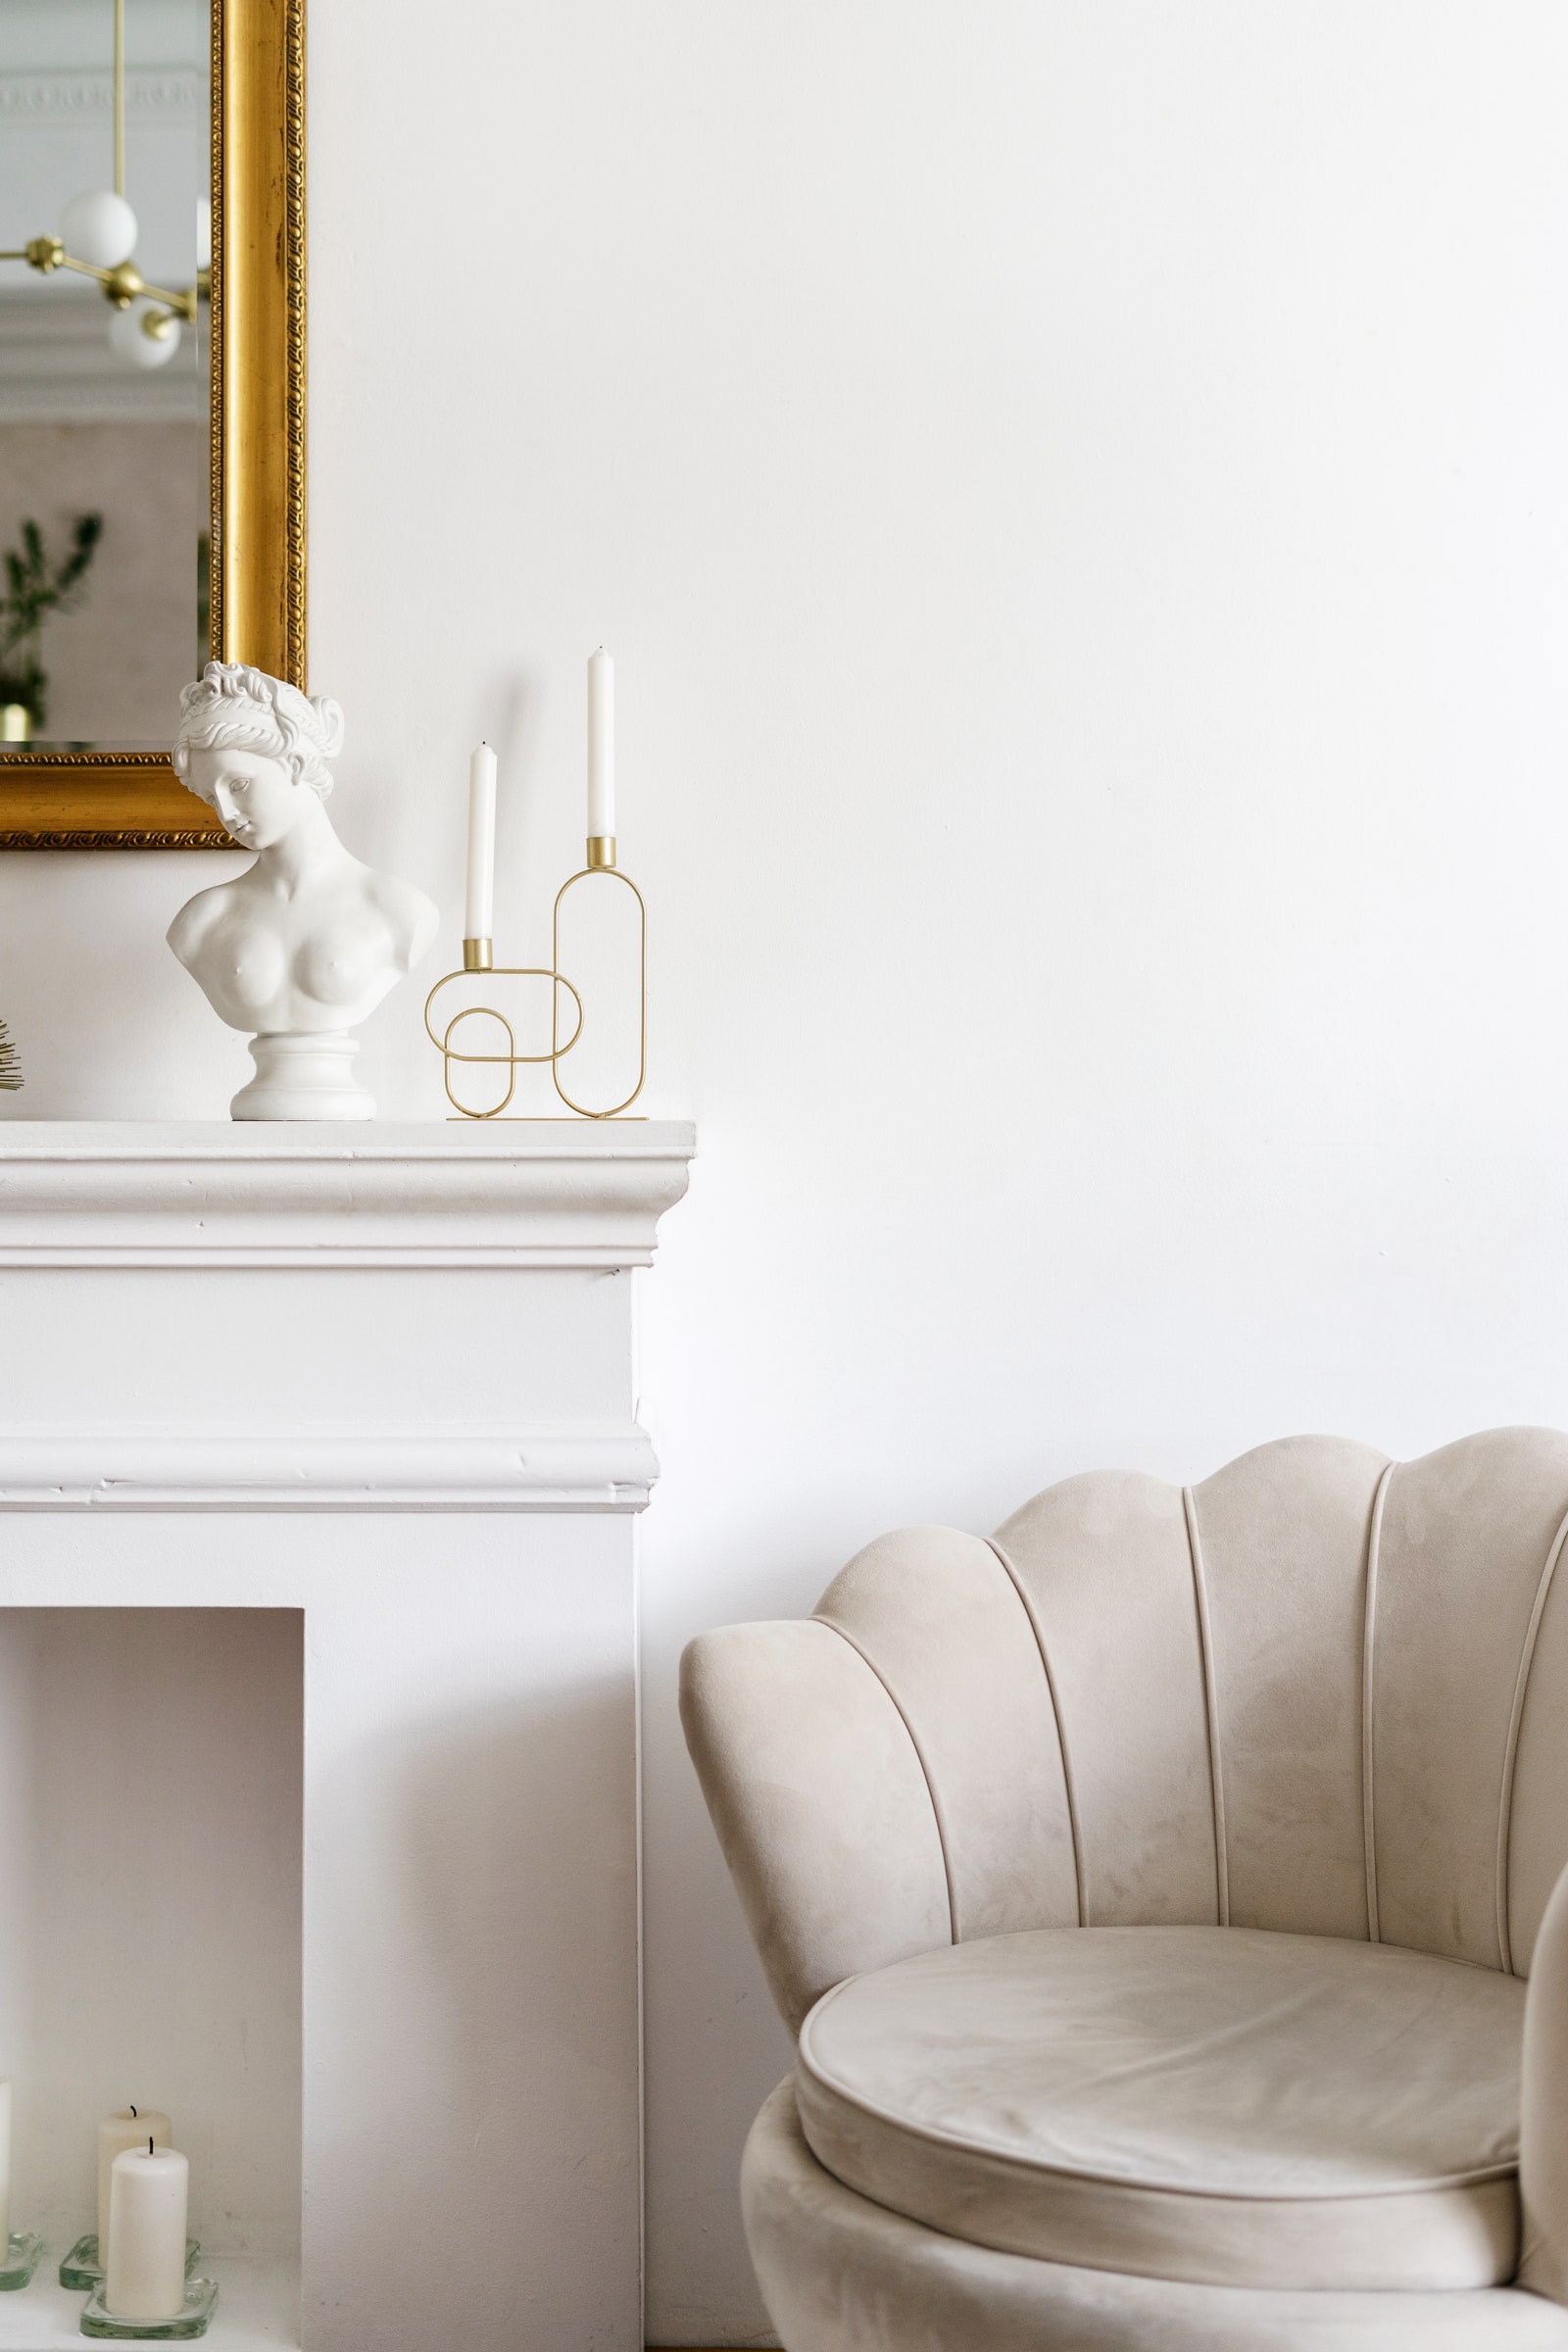 Modern candlestick holders mixed in with an antiquelooking bust give this mantelpiece an eclectic vibe.